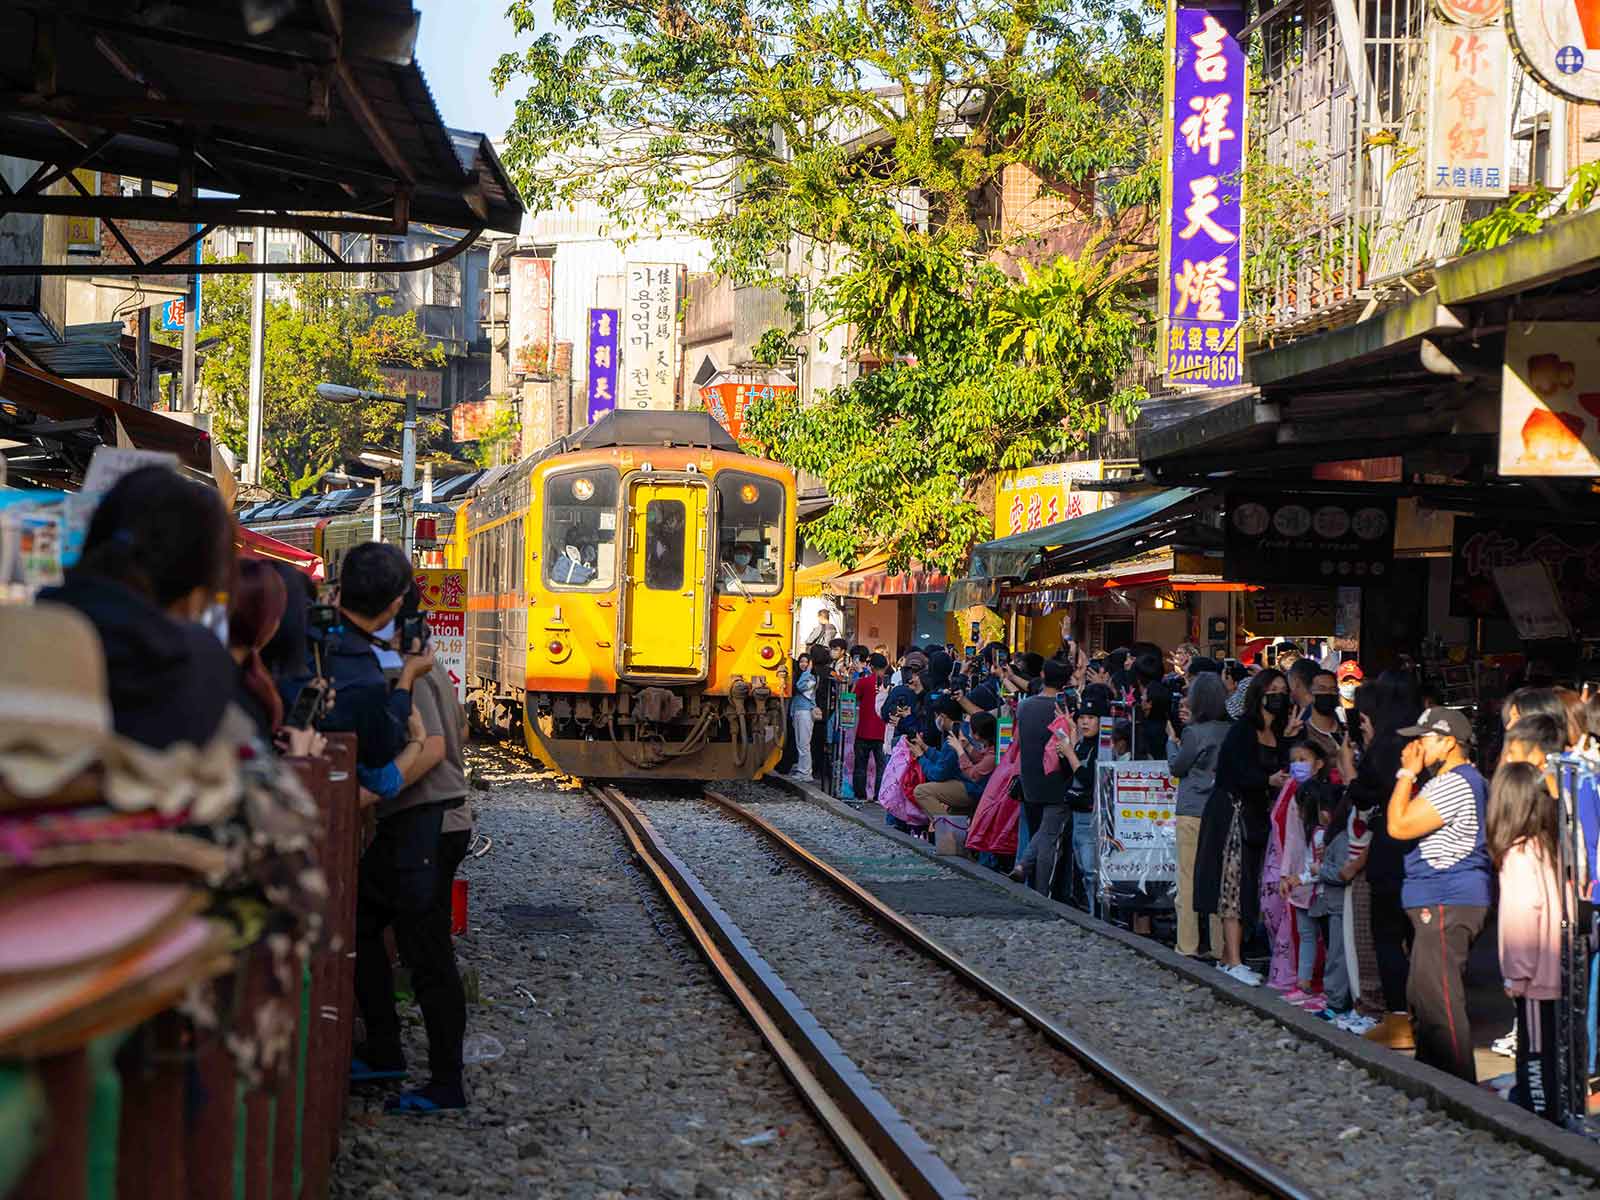 Crowds wait on either side of the track as a train passes through the narrow pedestrian area in Shifen Old Street.